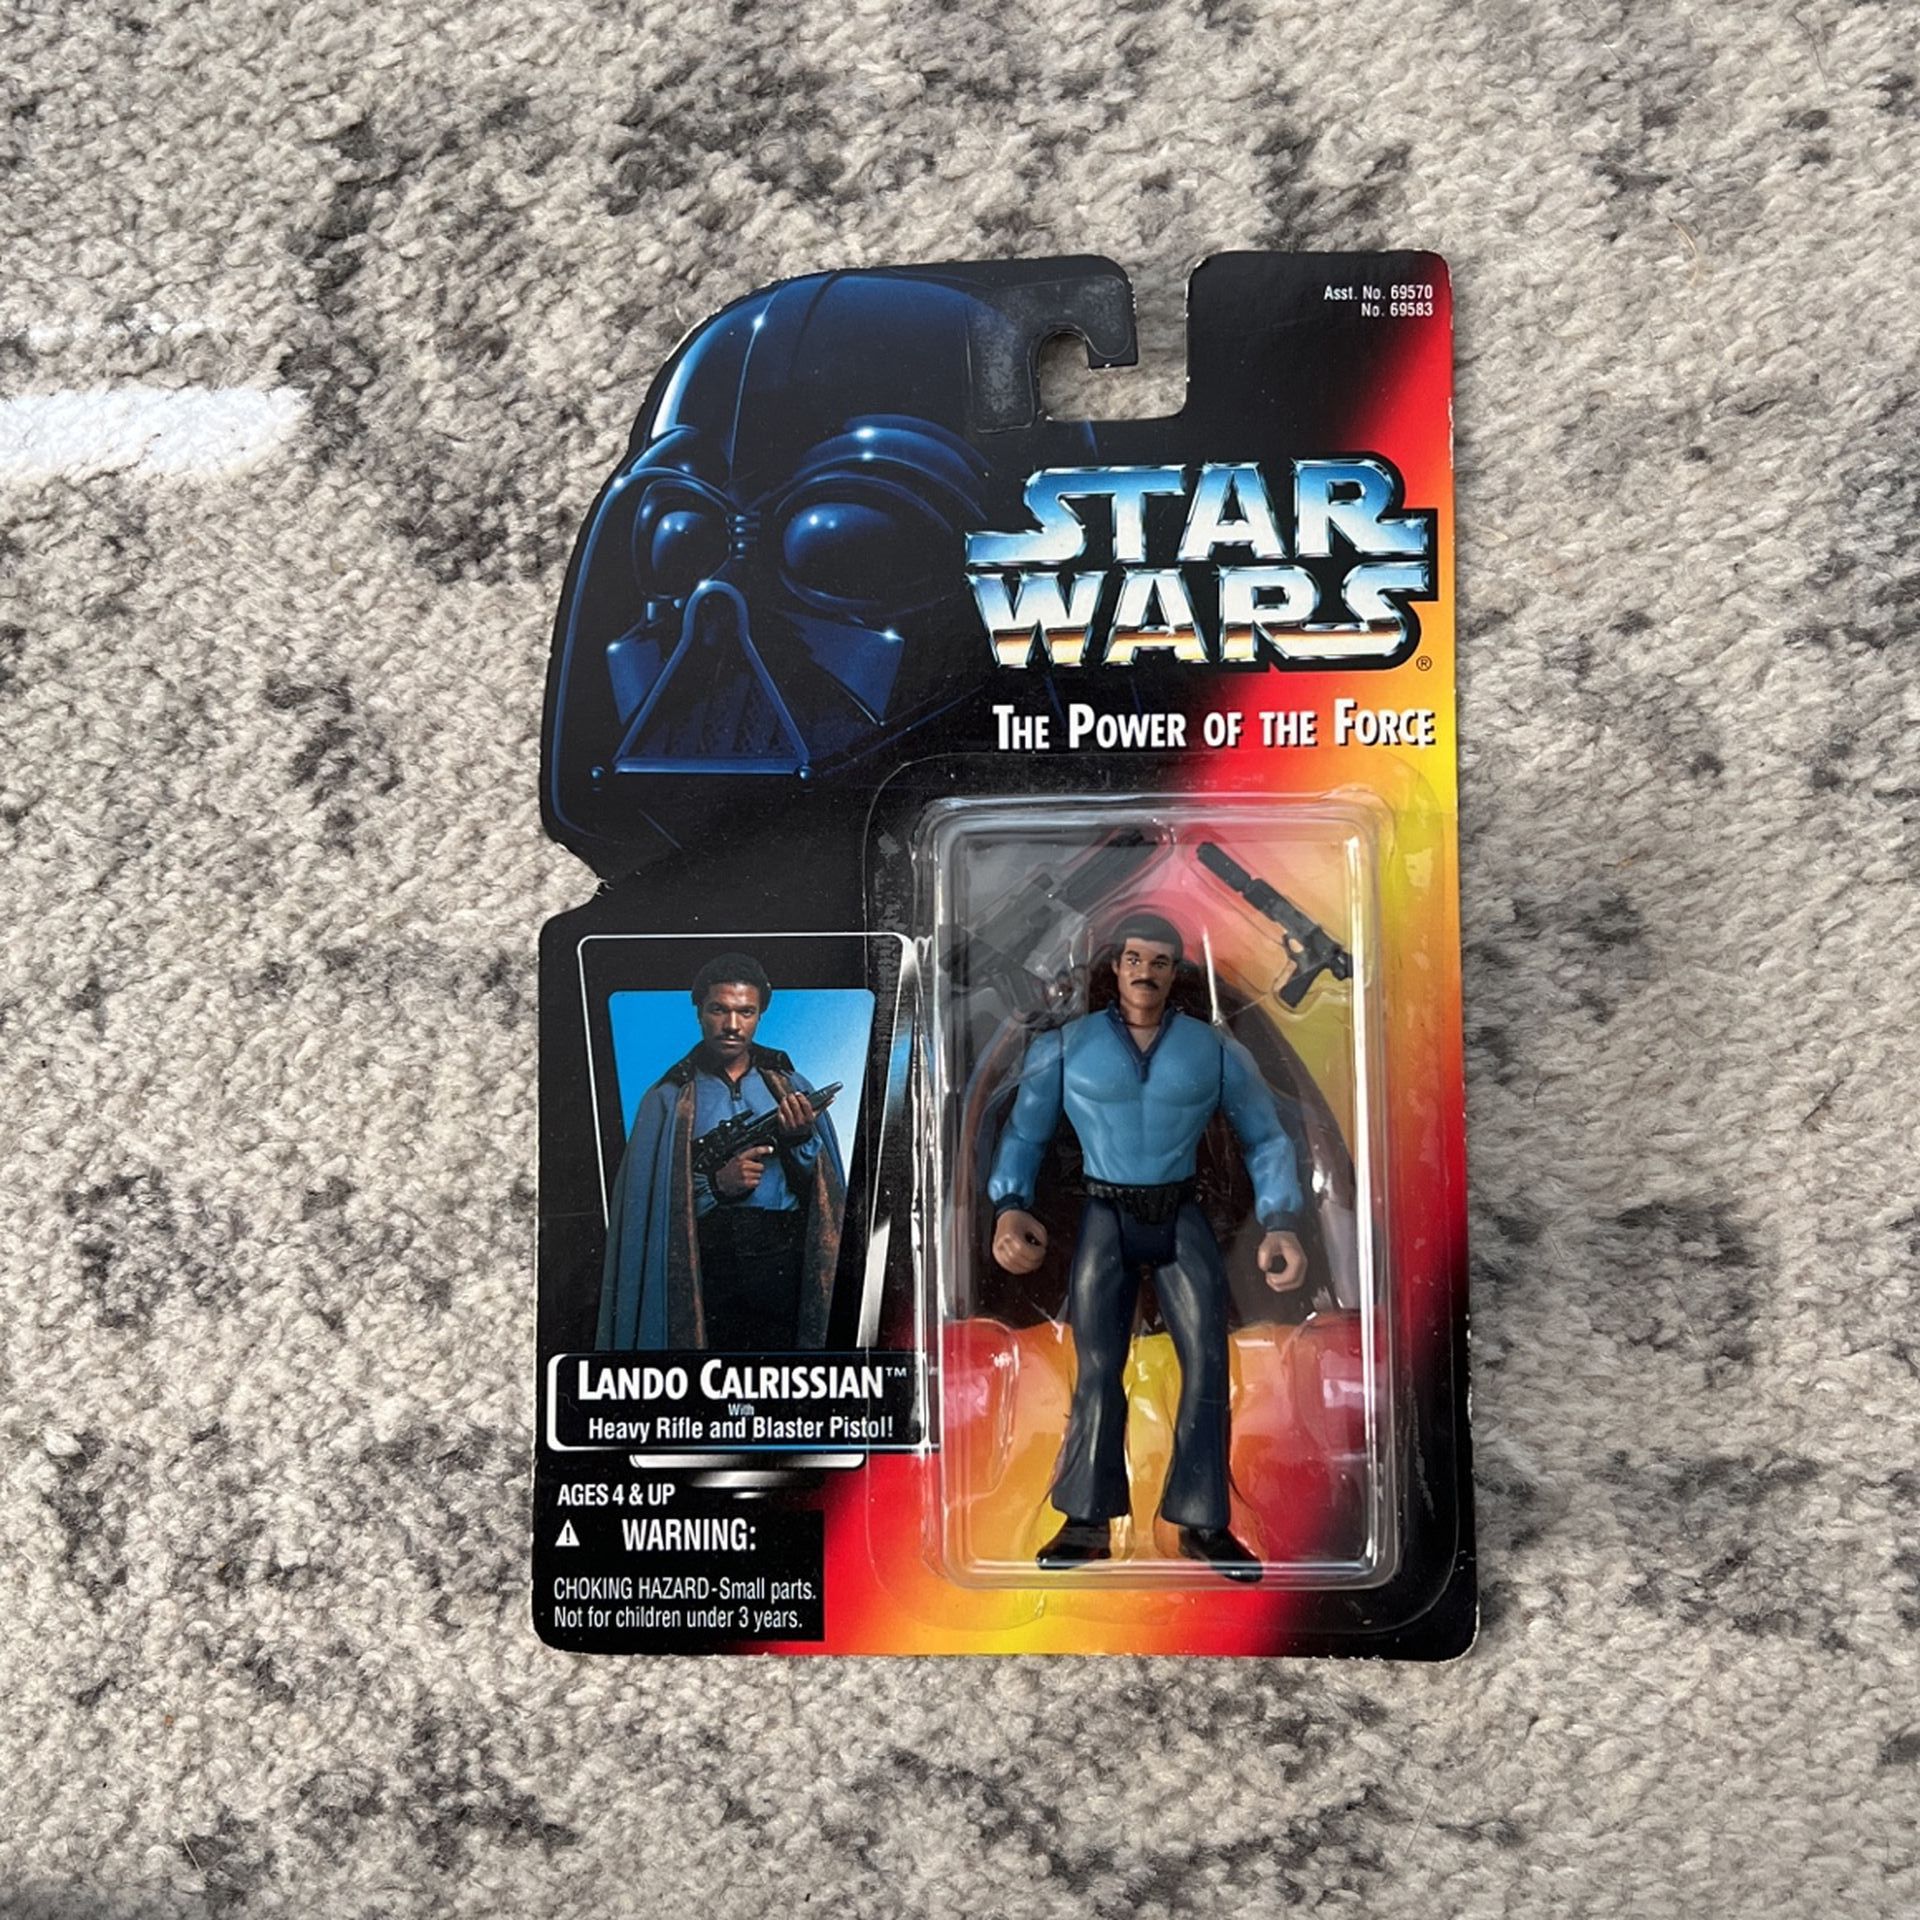 Star Wars Lando Calrissian Kenner Action Figure Power Of The Force Sealed